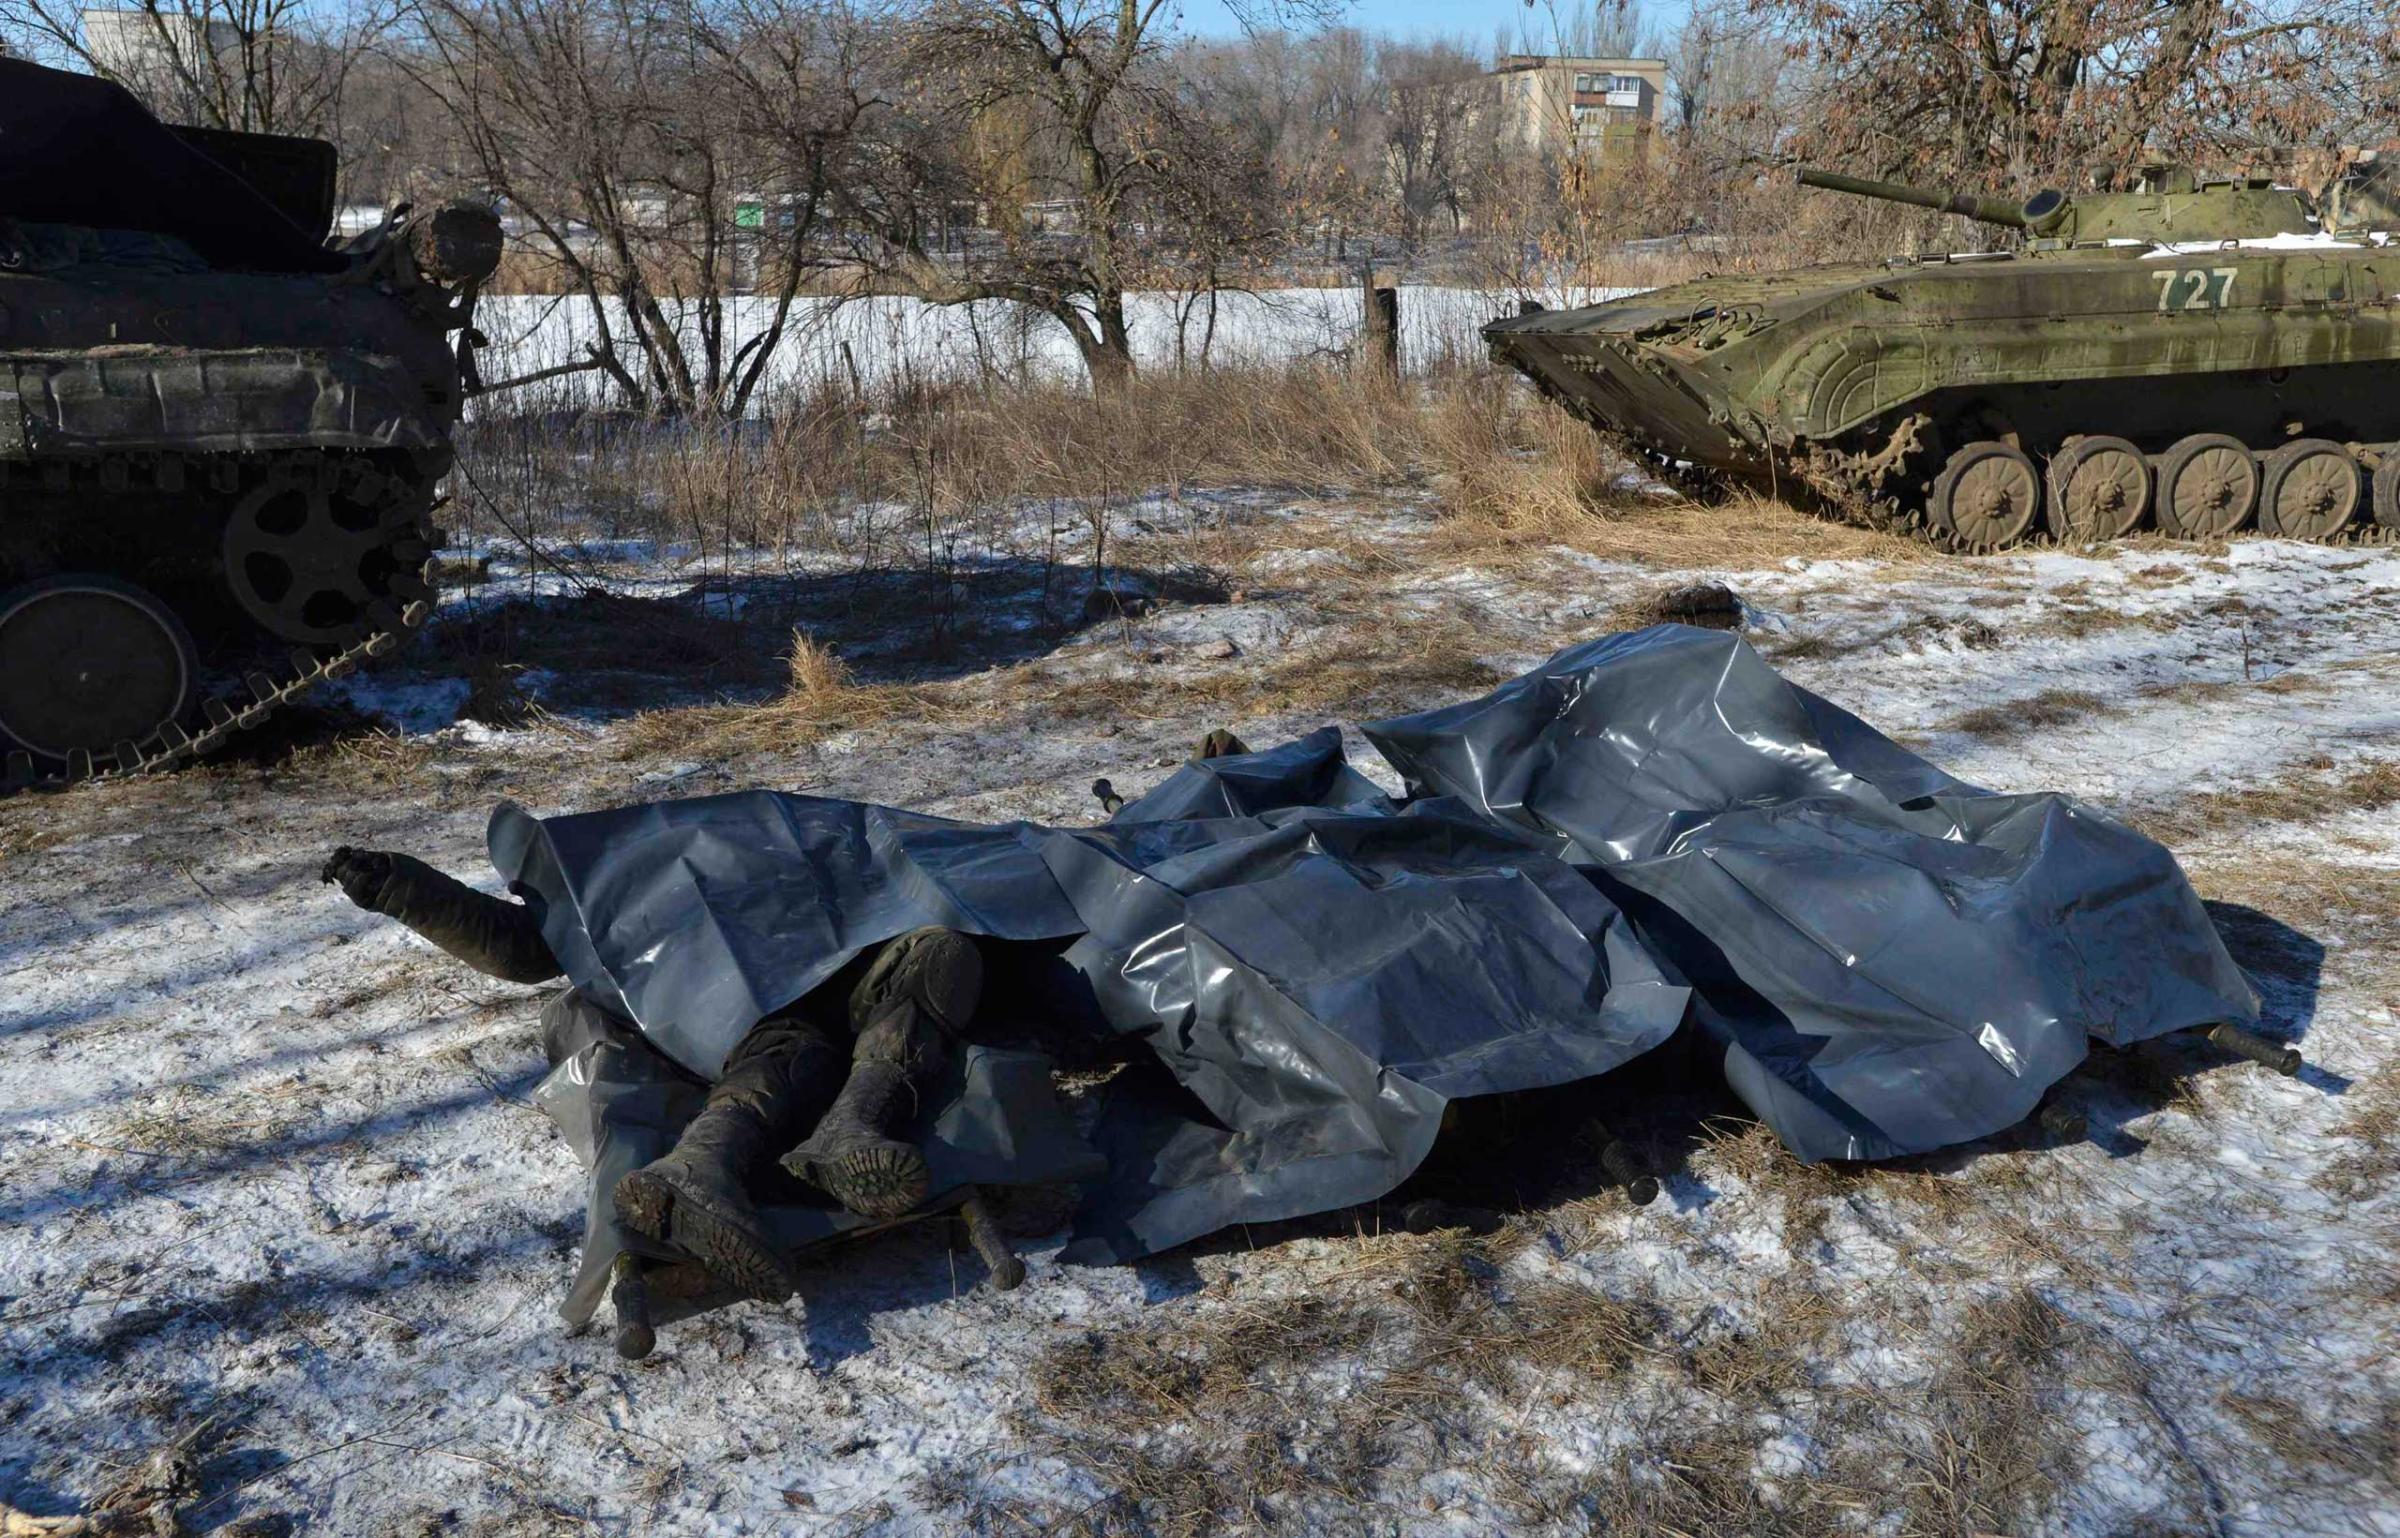 Bodies of Ukrainian soldiers killed in Debaltseve are pictured on stretchers at a military camp in Artemivsk, Feb. 18, 2015.